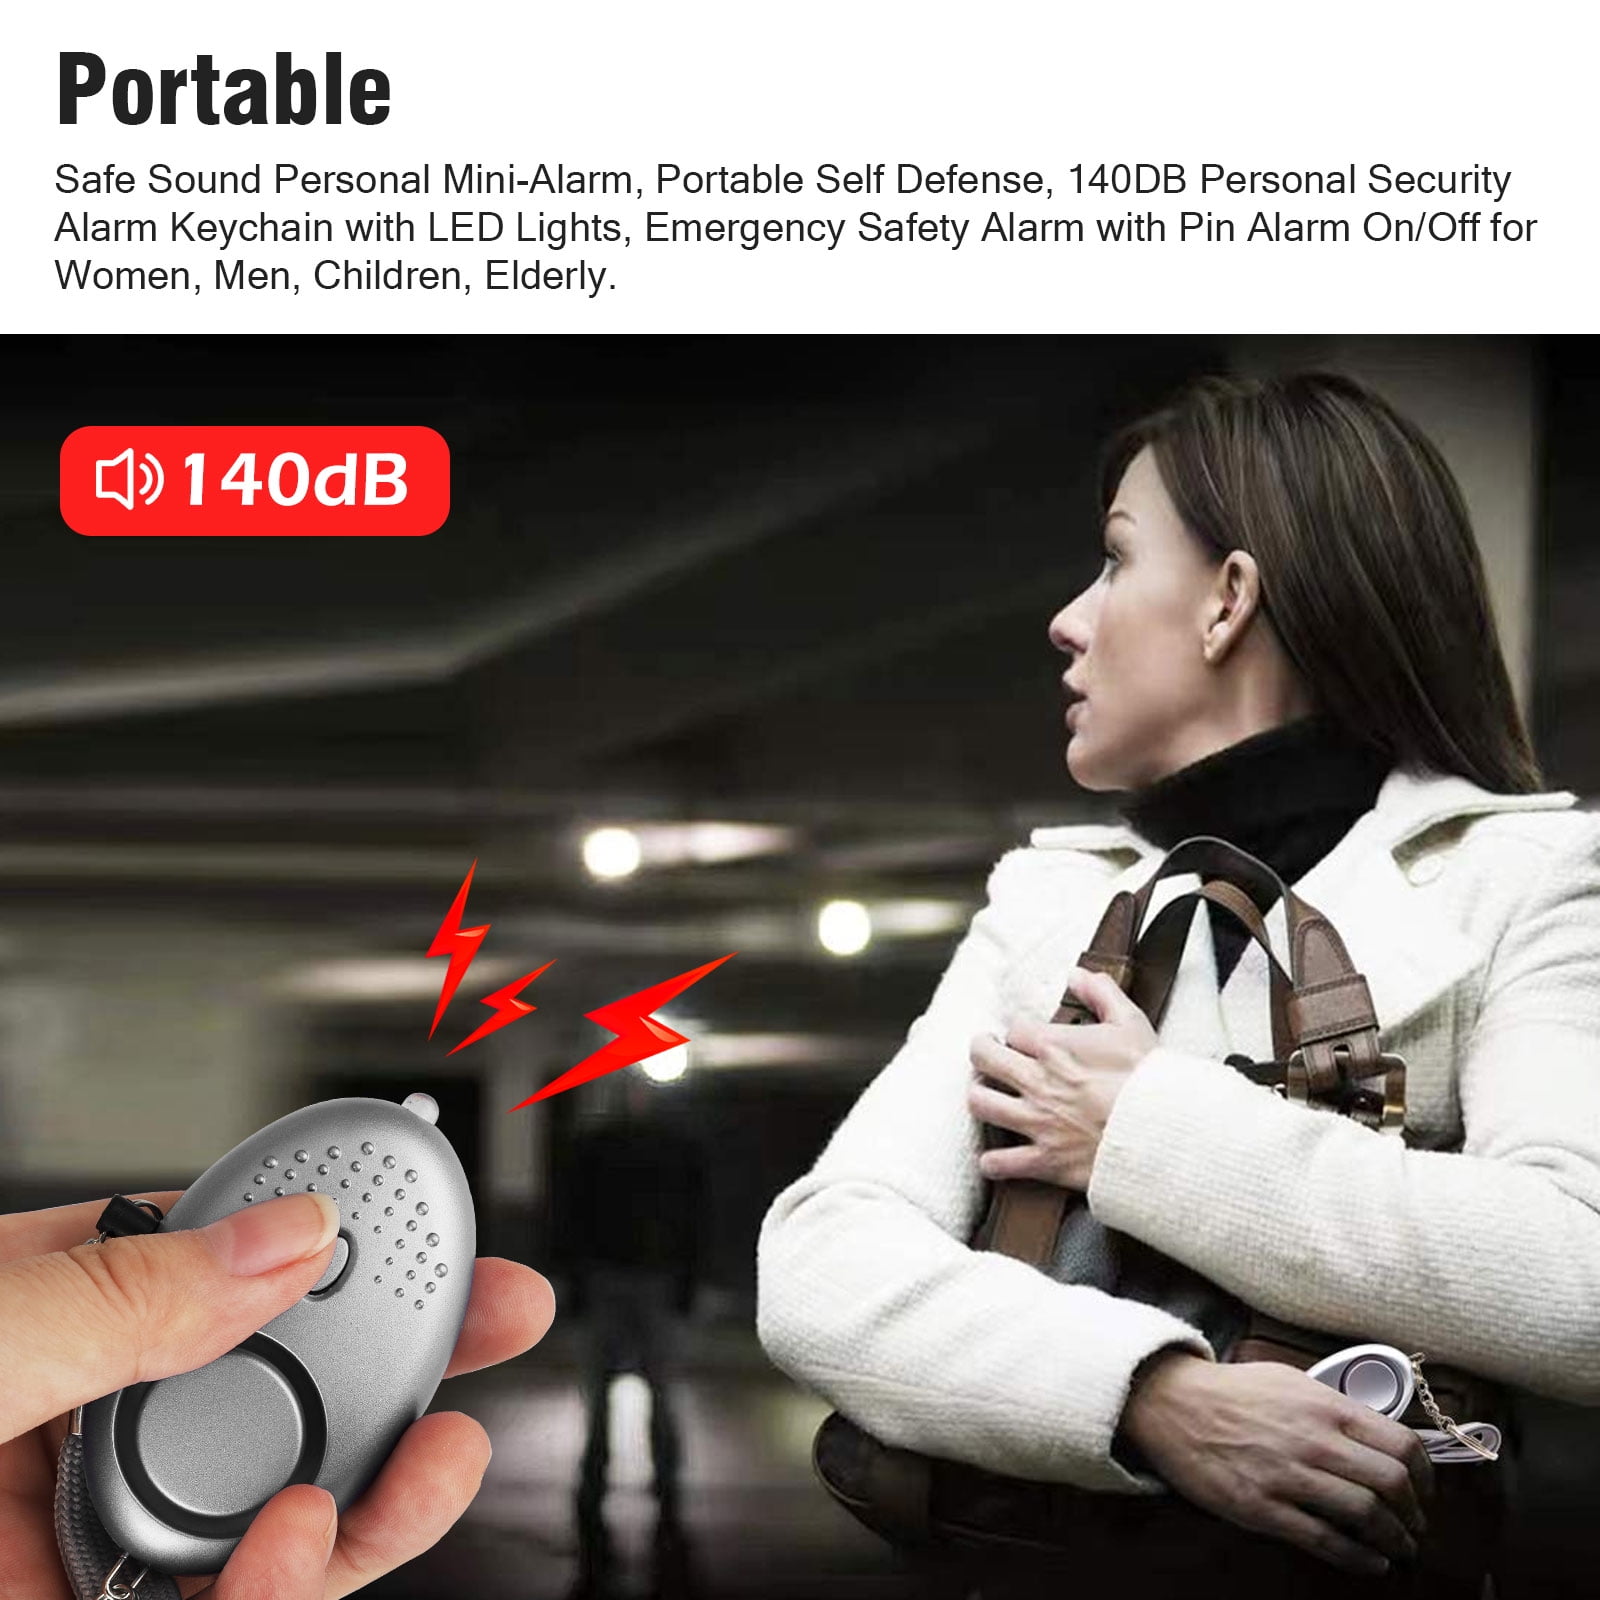 Details about   5X140DB Safe Sound Personal Security Alarm Keychain Emergency Siren w/ LED Light 